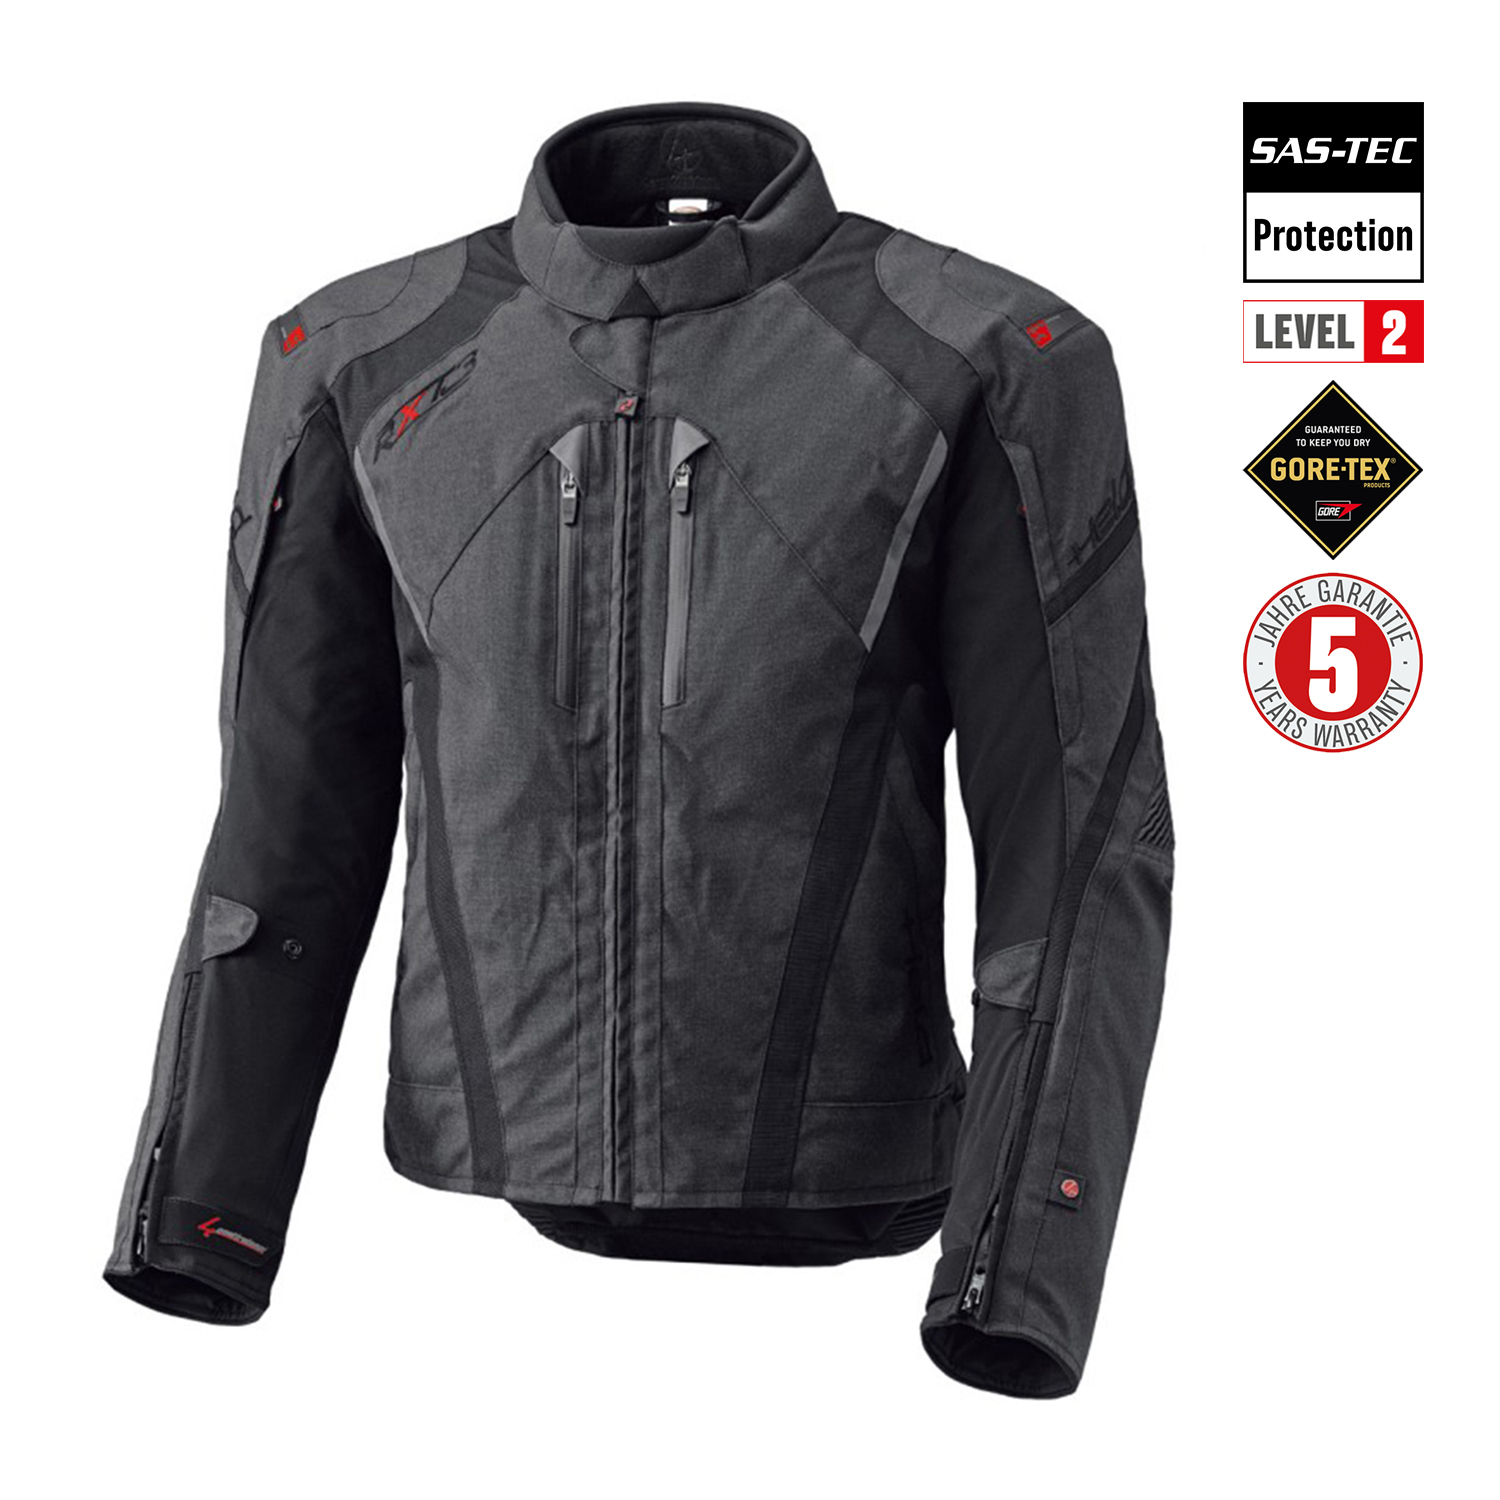 Held Imola Flash Jacket - Available in Various Sizes